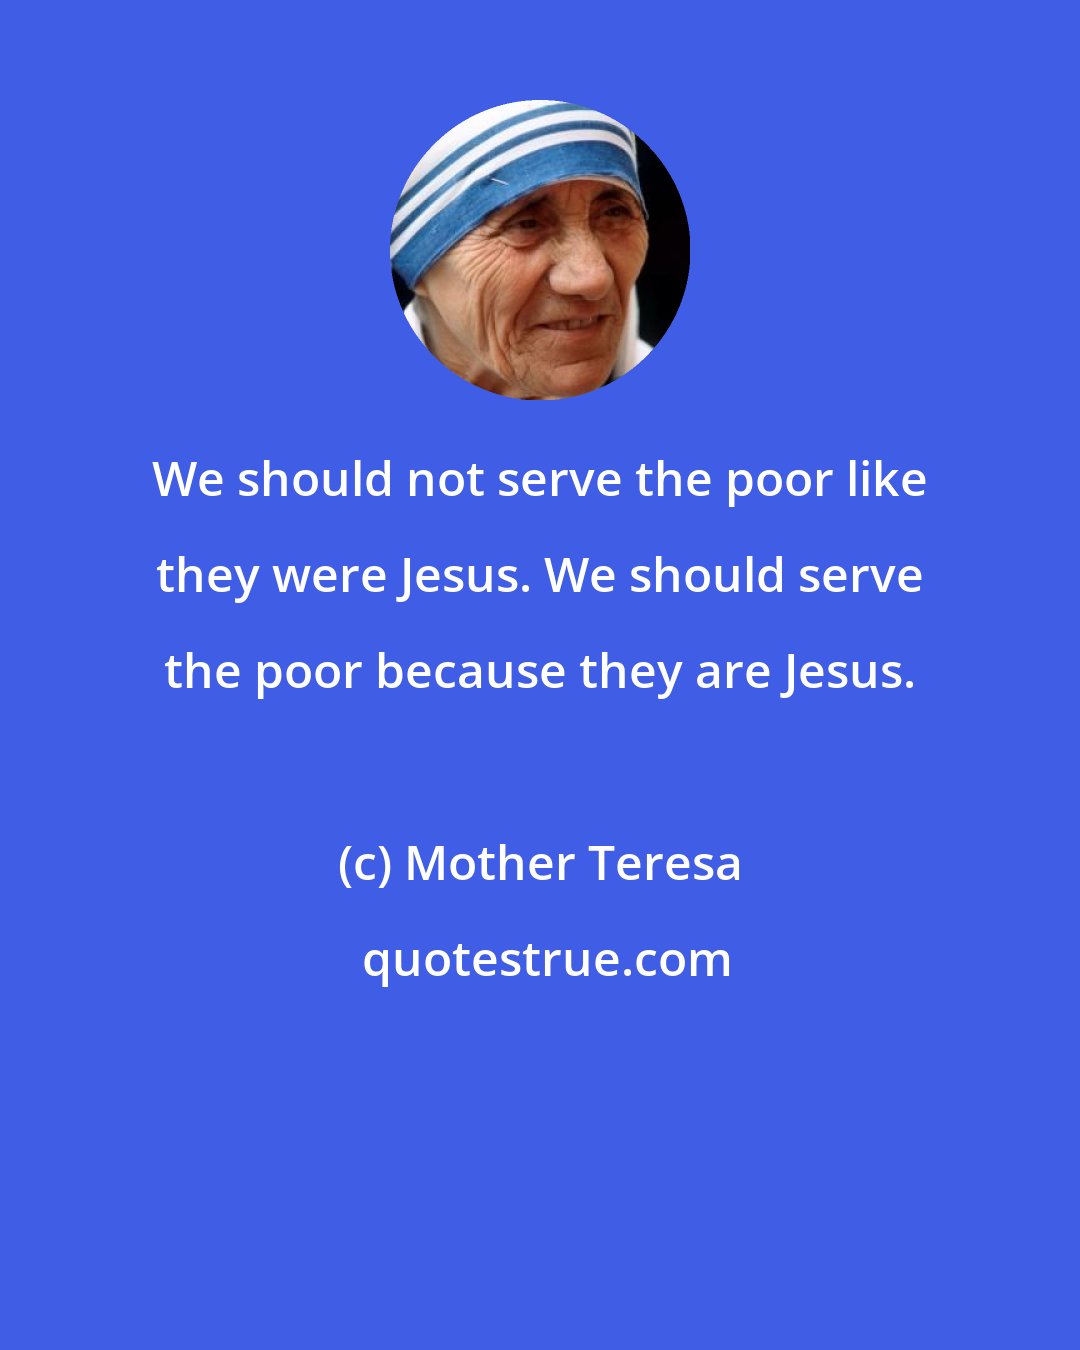 Mother Teresa: We should not serve the poor like they were Jesus. We should serve the poor because they are Jesus.